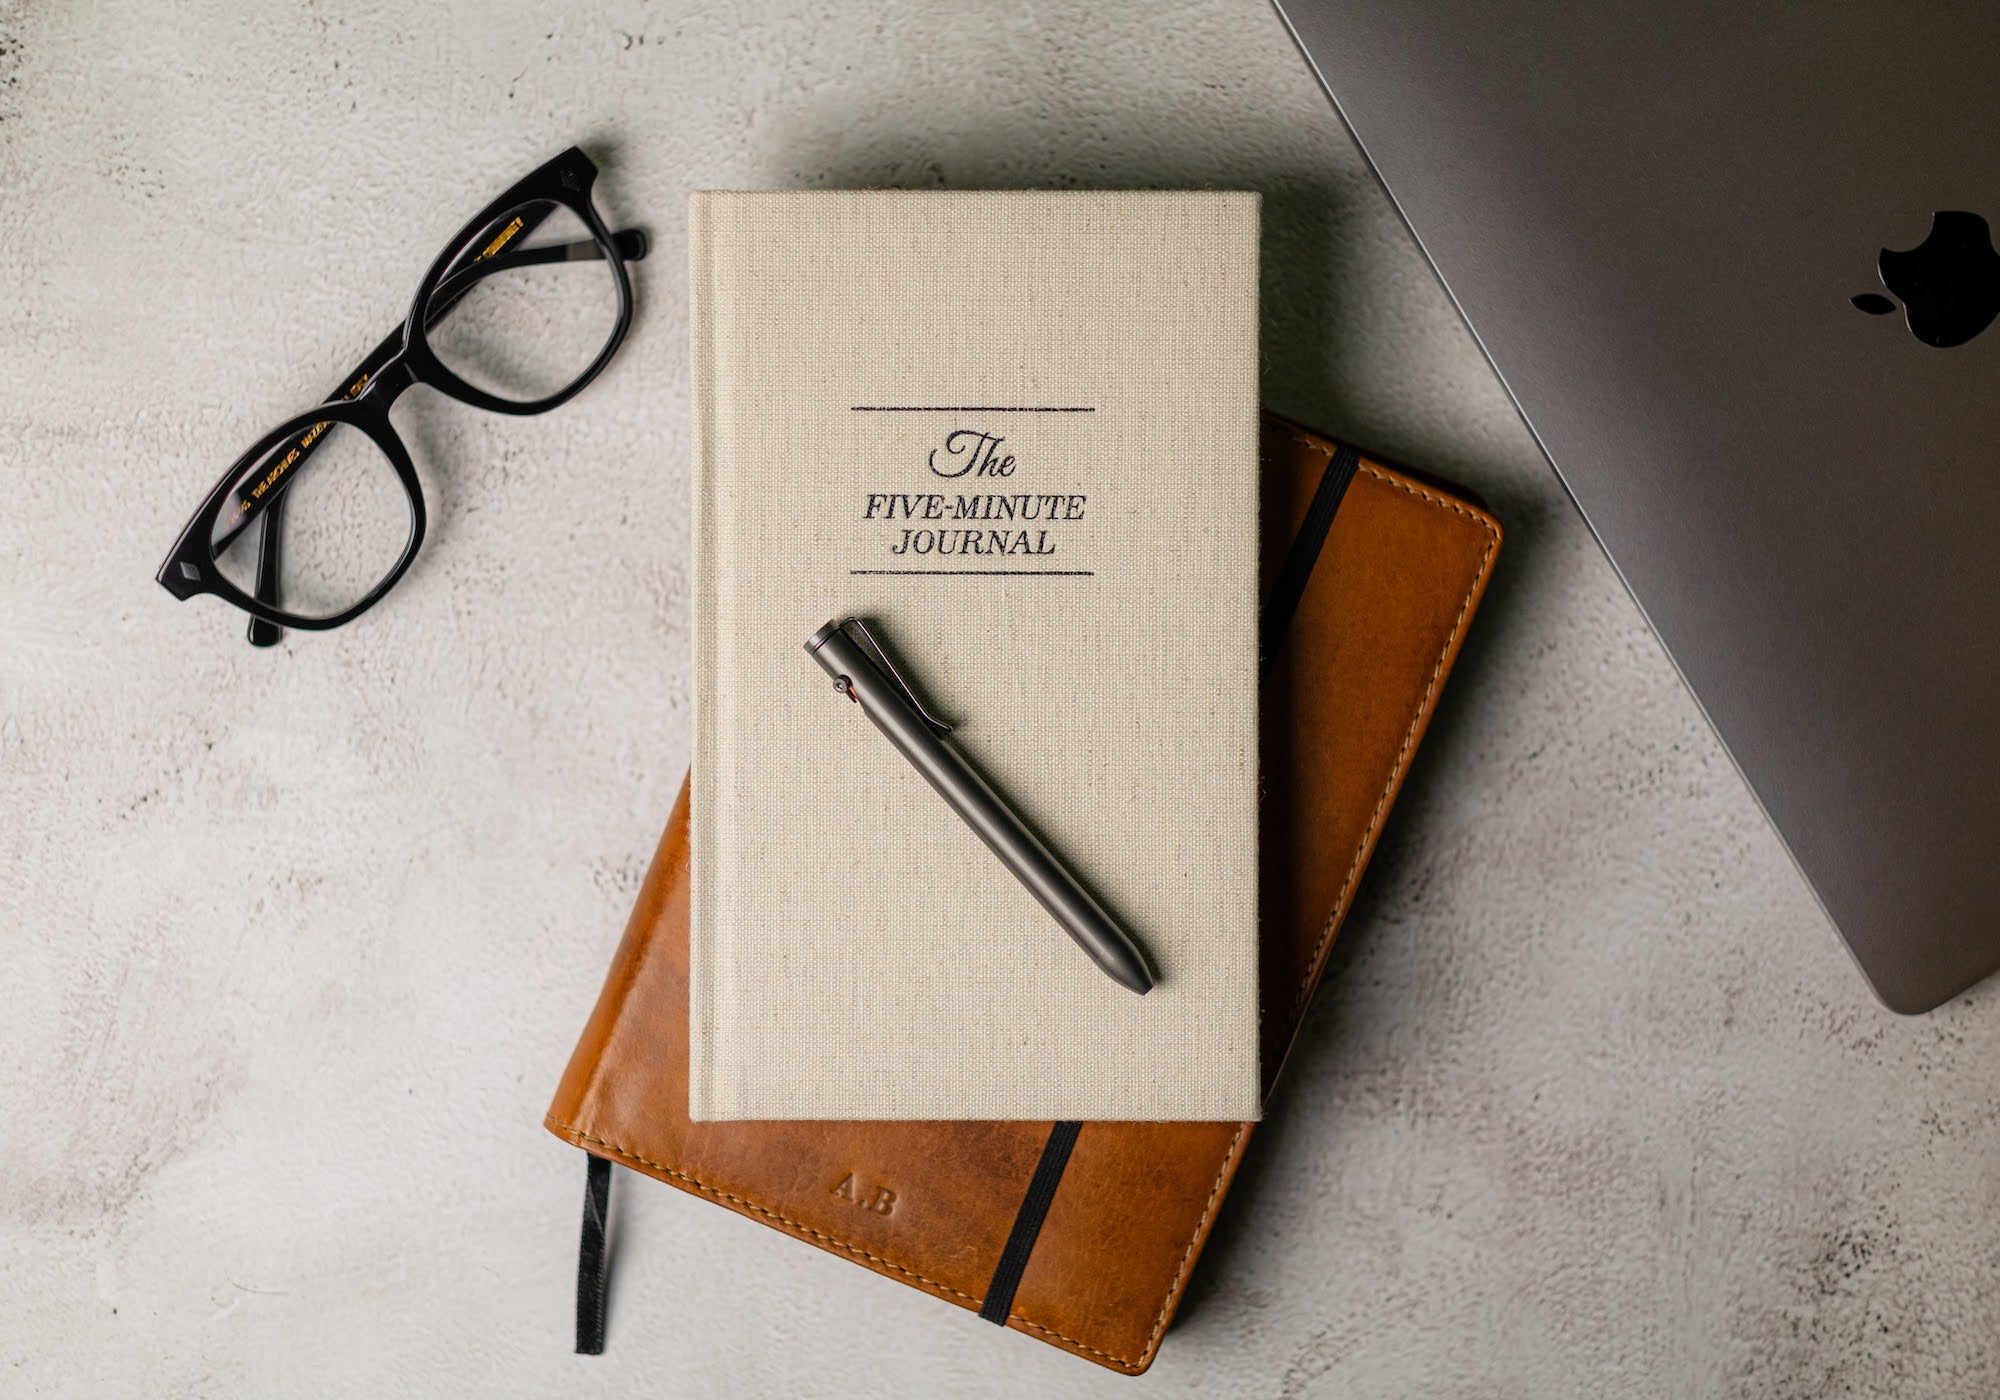 Five-Minute Journal Review 2019: The Easiest Way to Turn Your Life